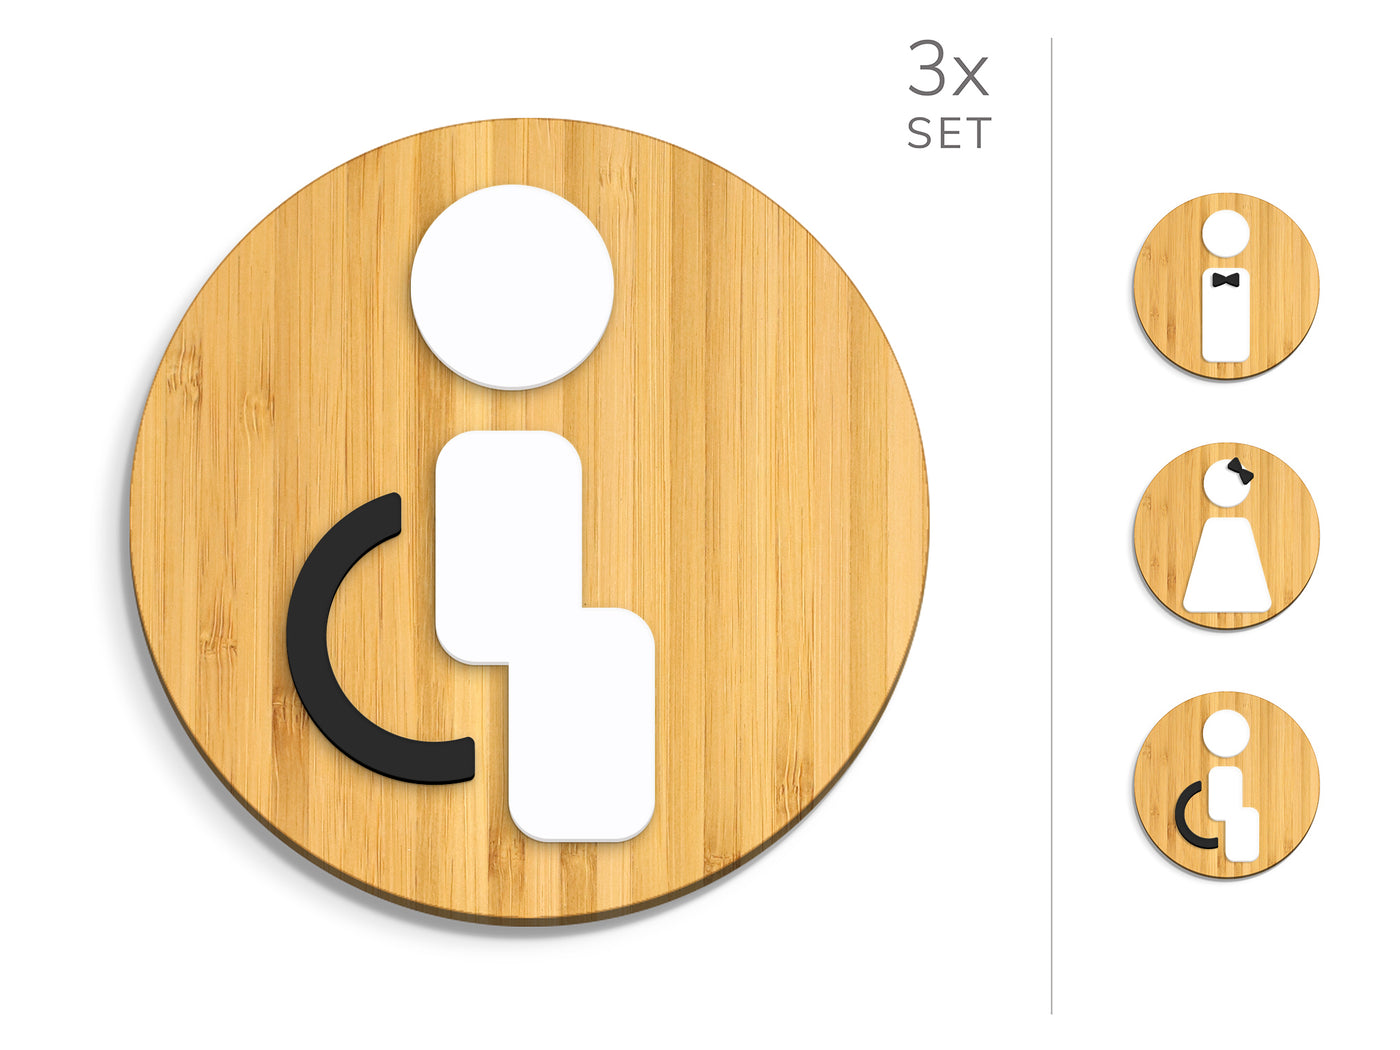 Styled knot, 3x Round Base - Restroom Signs Set - Man, Woman, Disabled